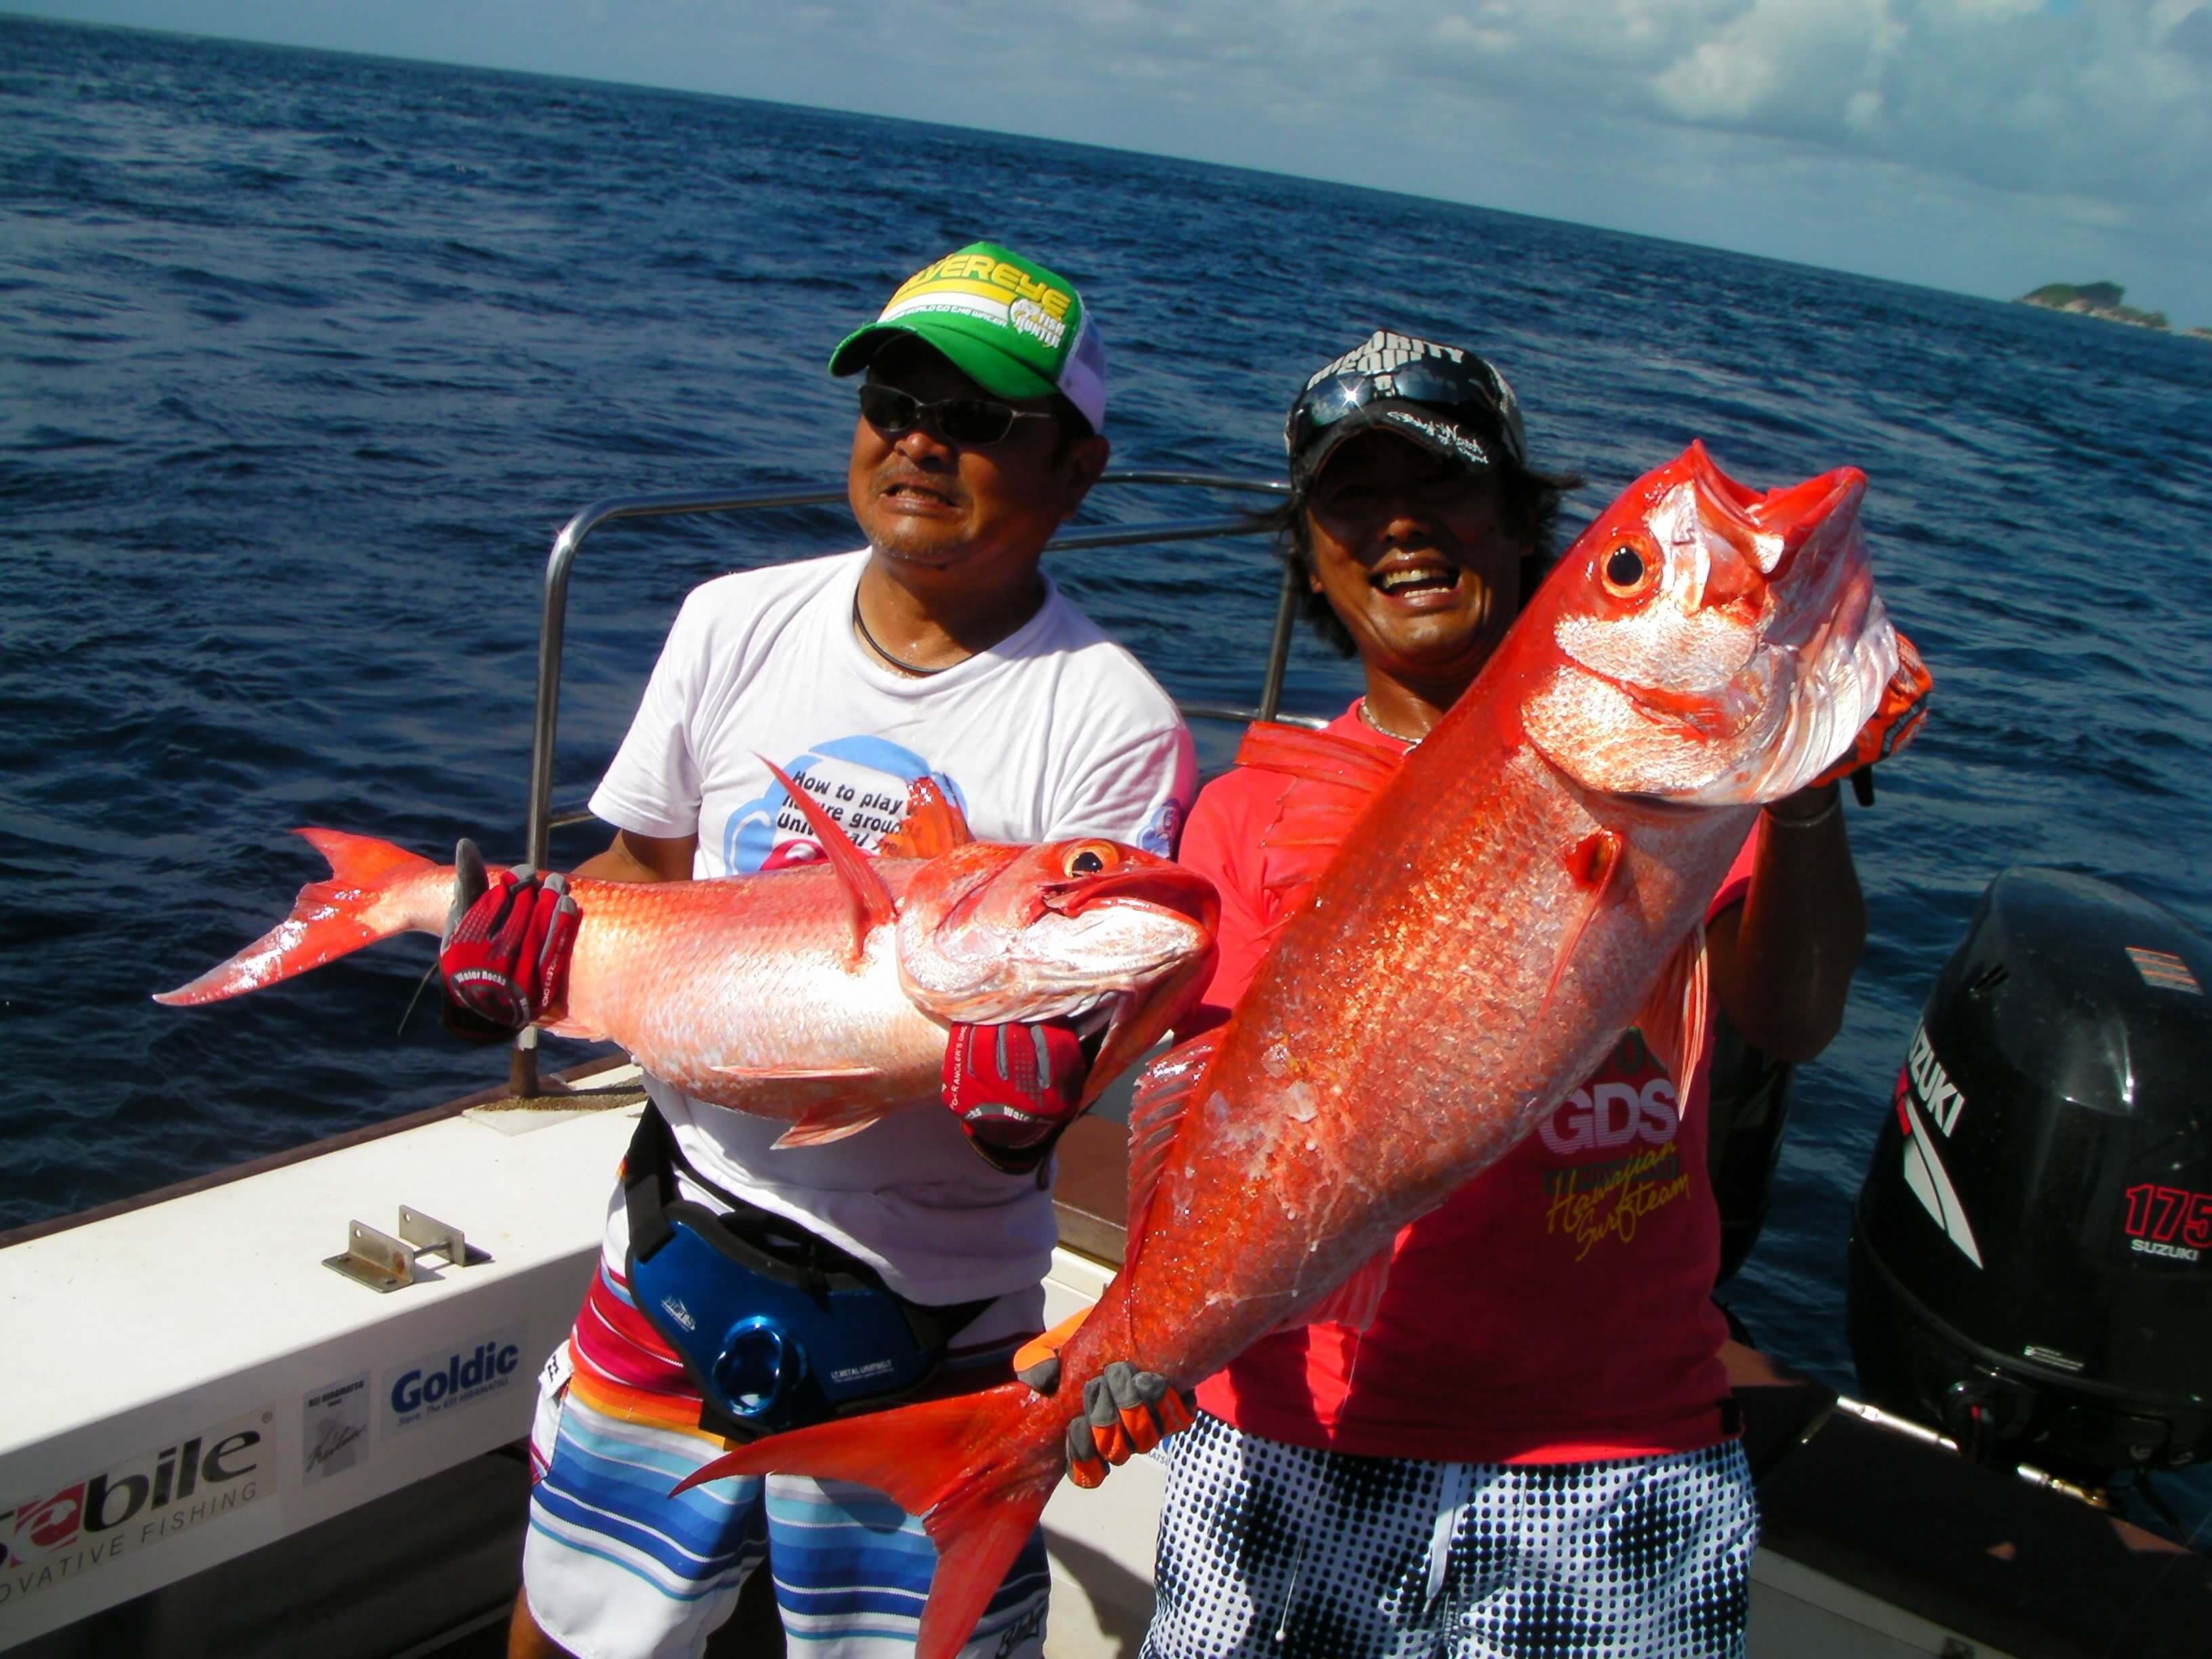 The tourist caught two red mullet fishes in fishing tour in Hikkaduwa Sri Lanka